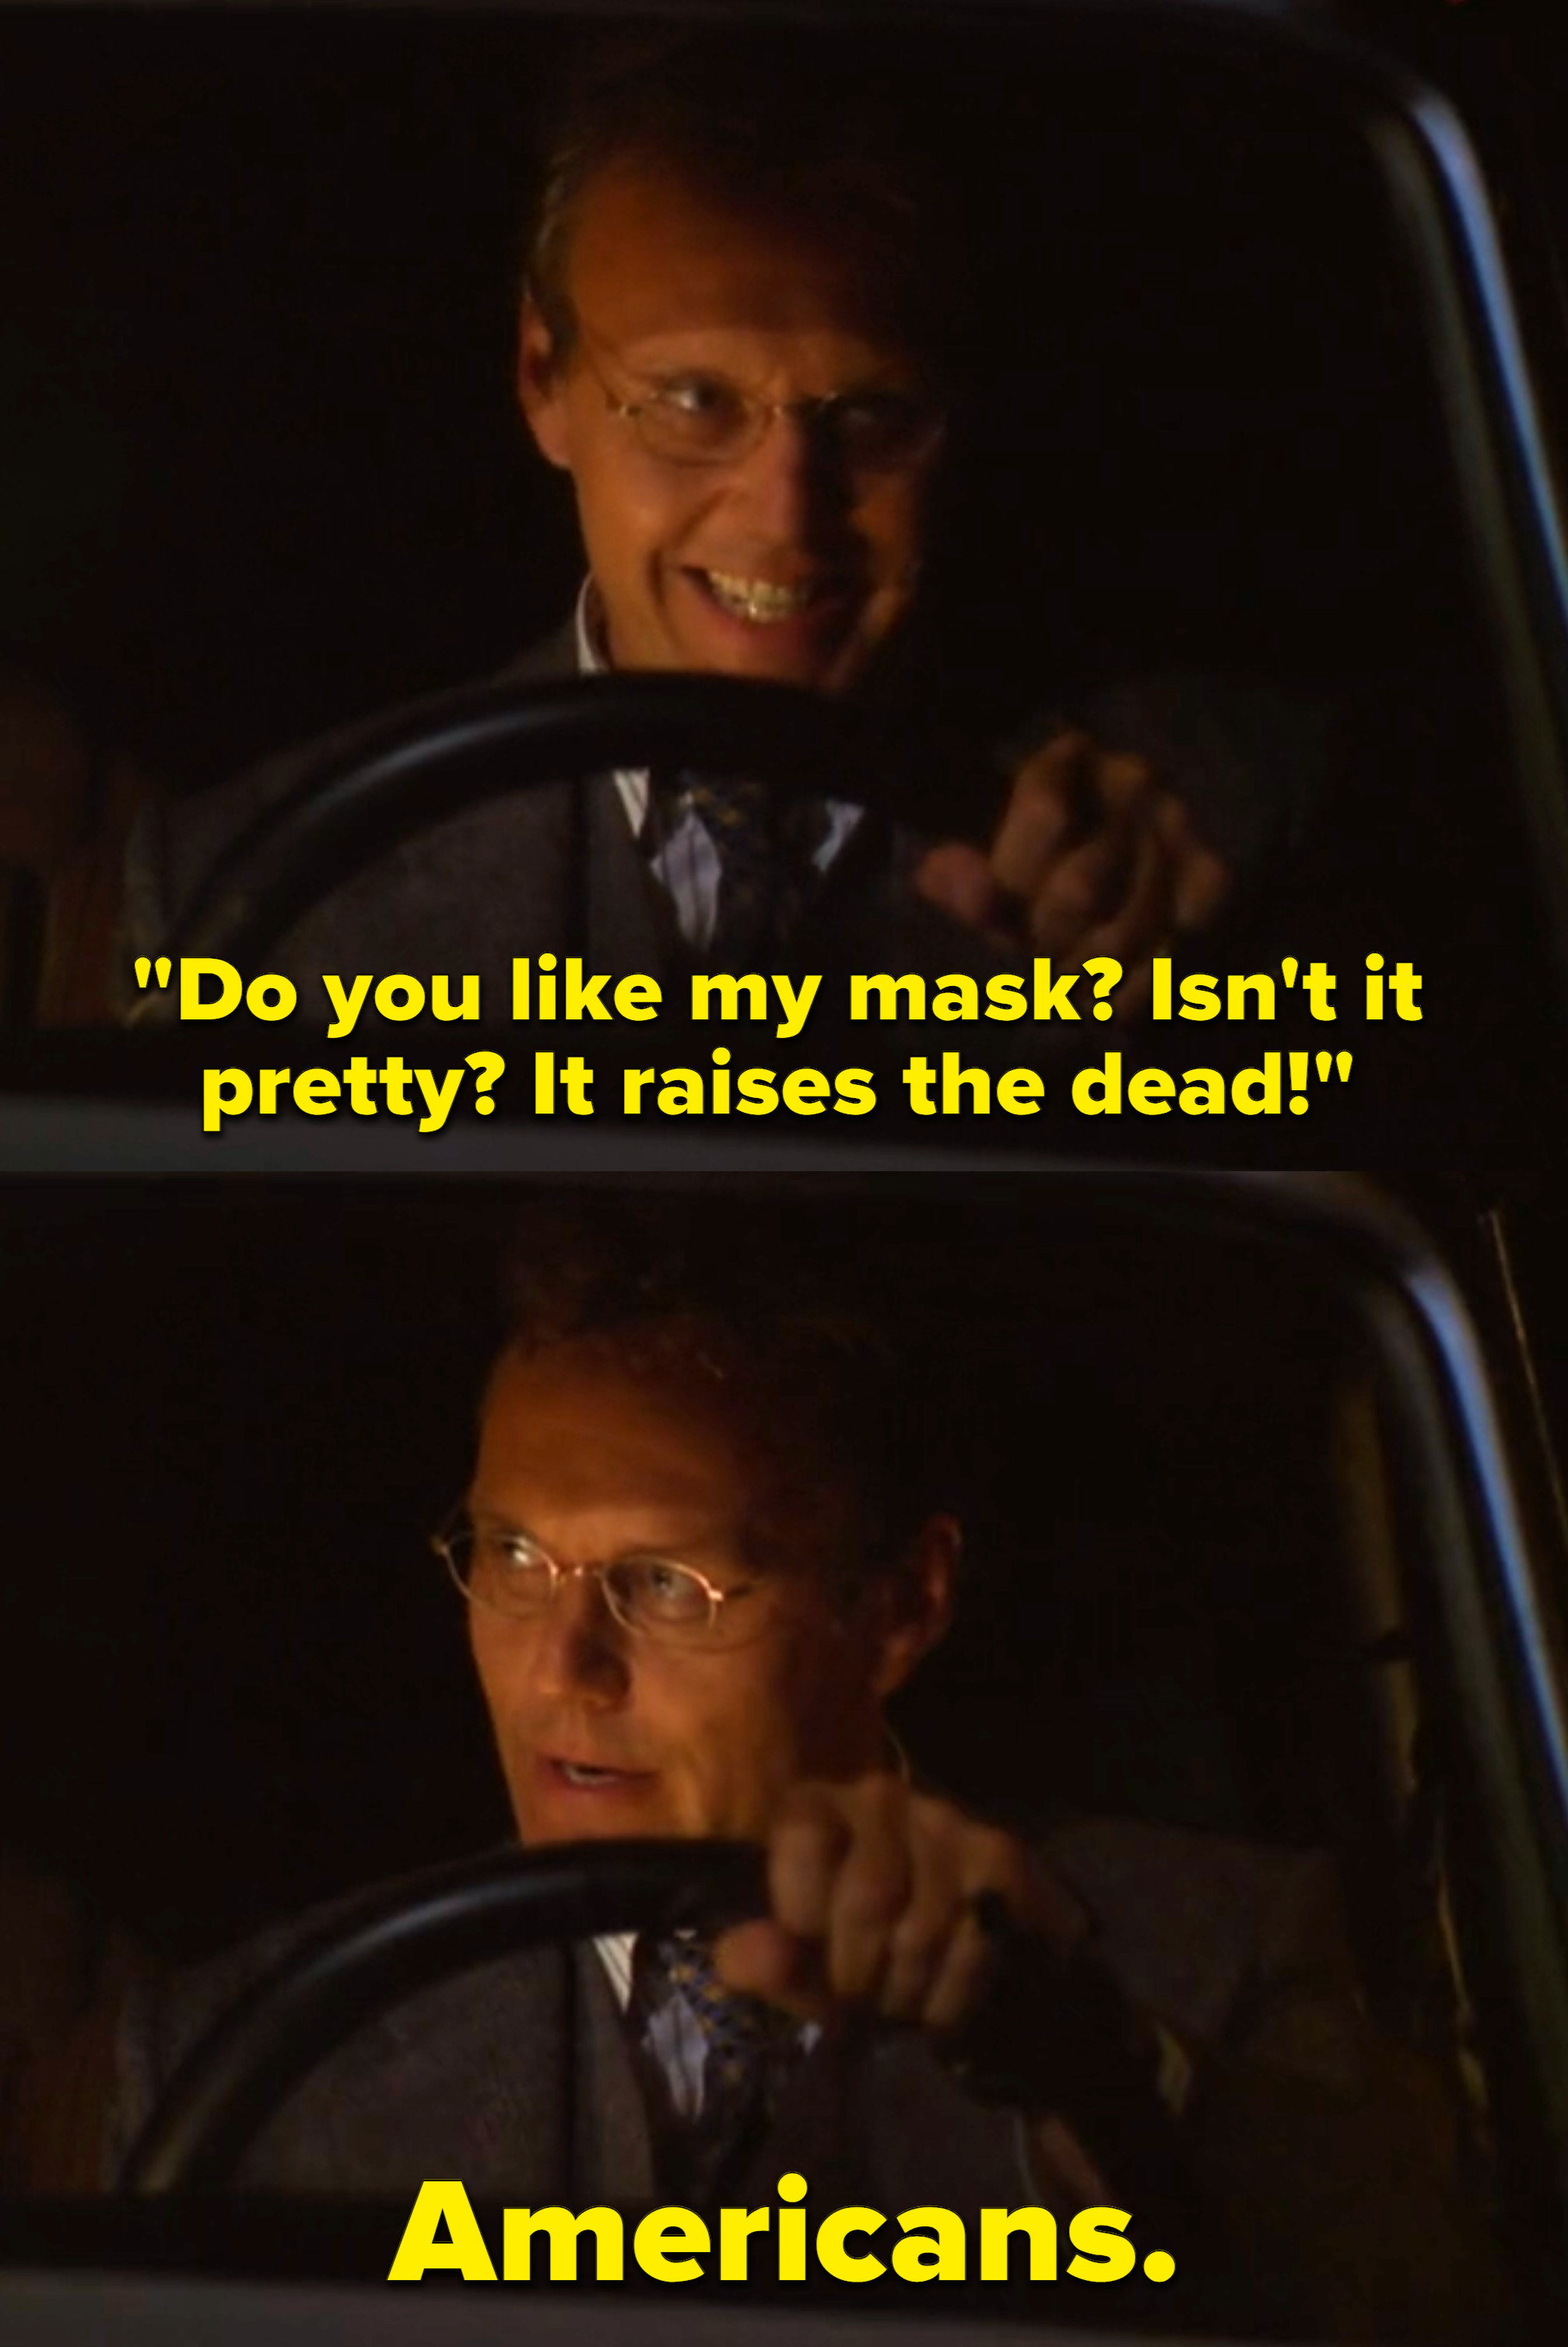 Giles mockingly saying &quot;Do you like my mask? Isn&#x27;t it pretty? It raises the dead! Americans.&quot;